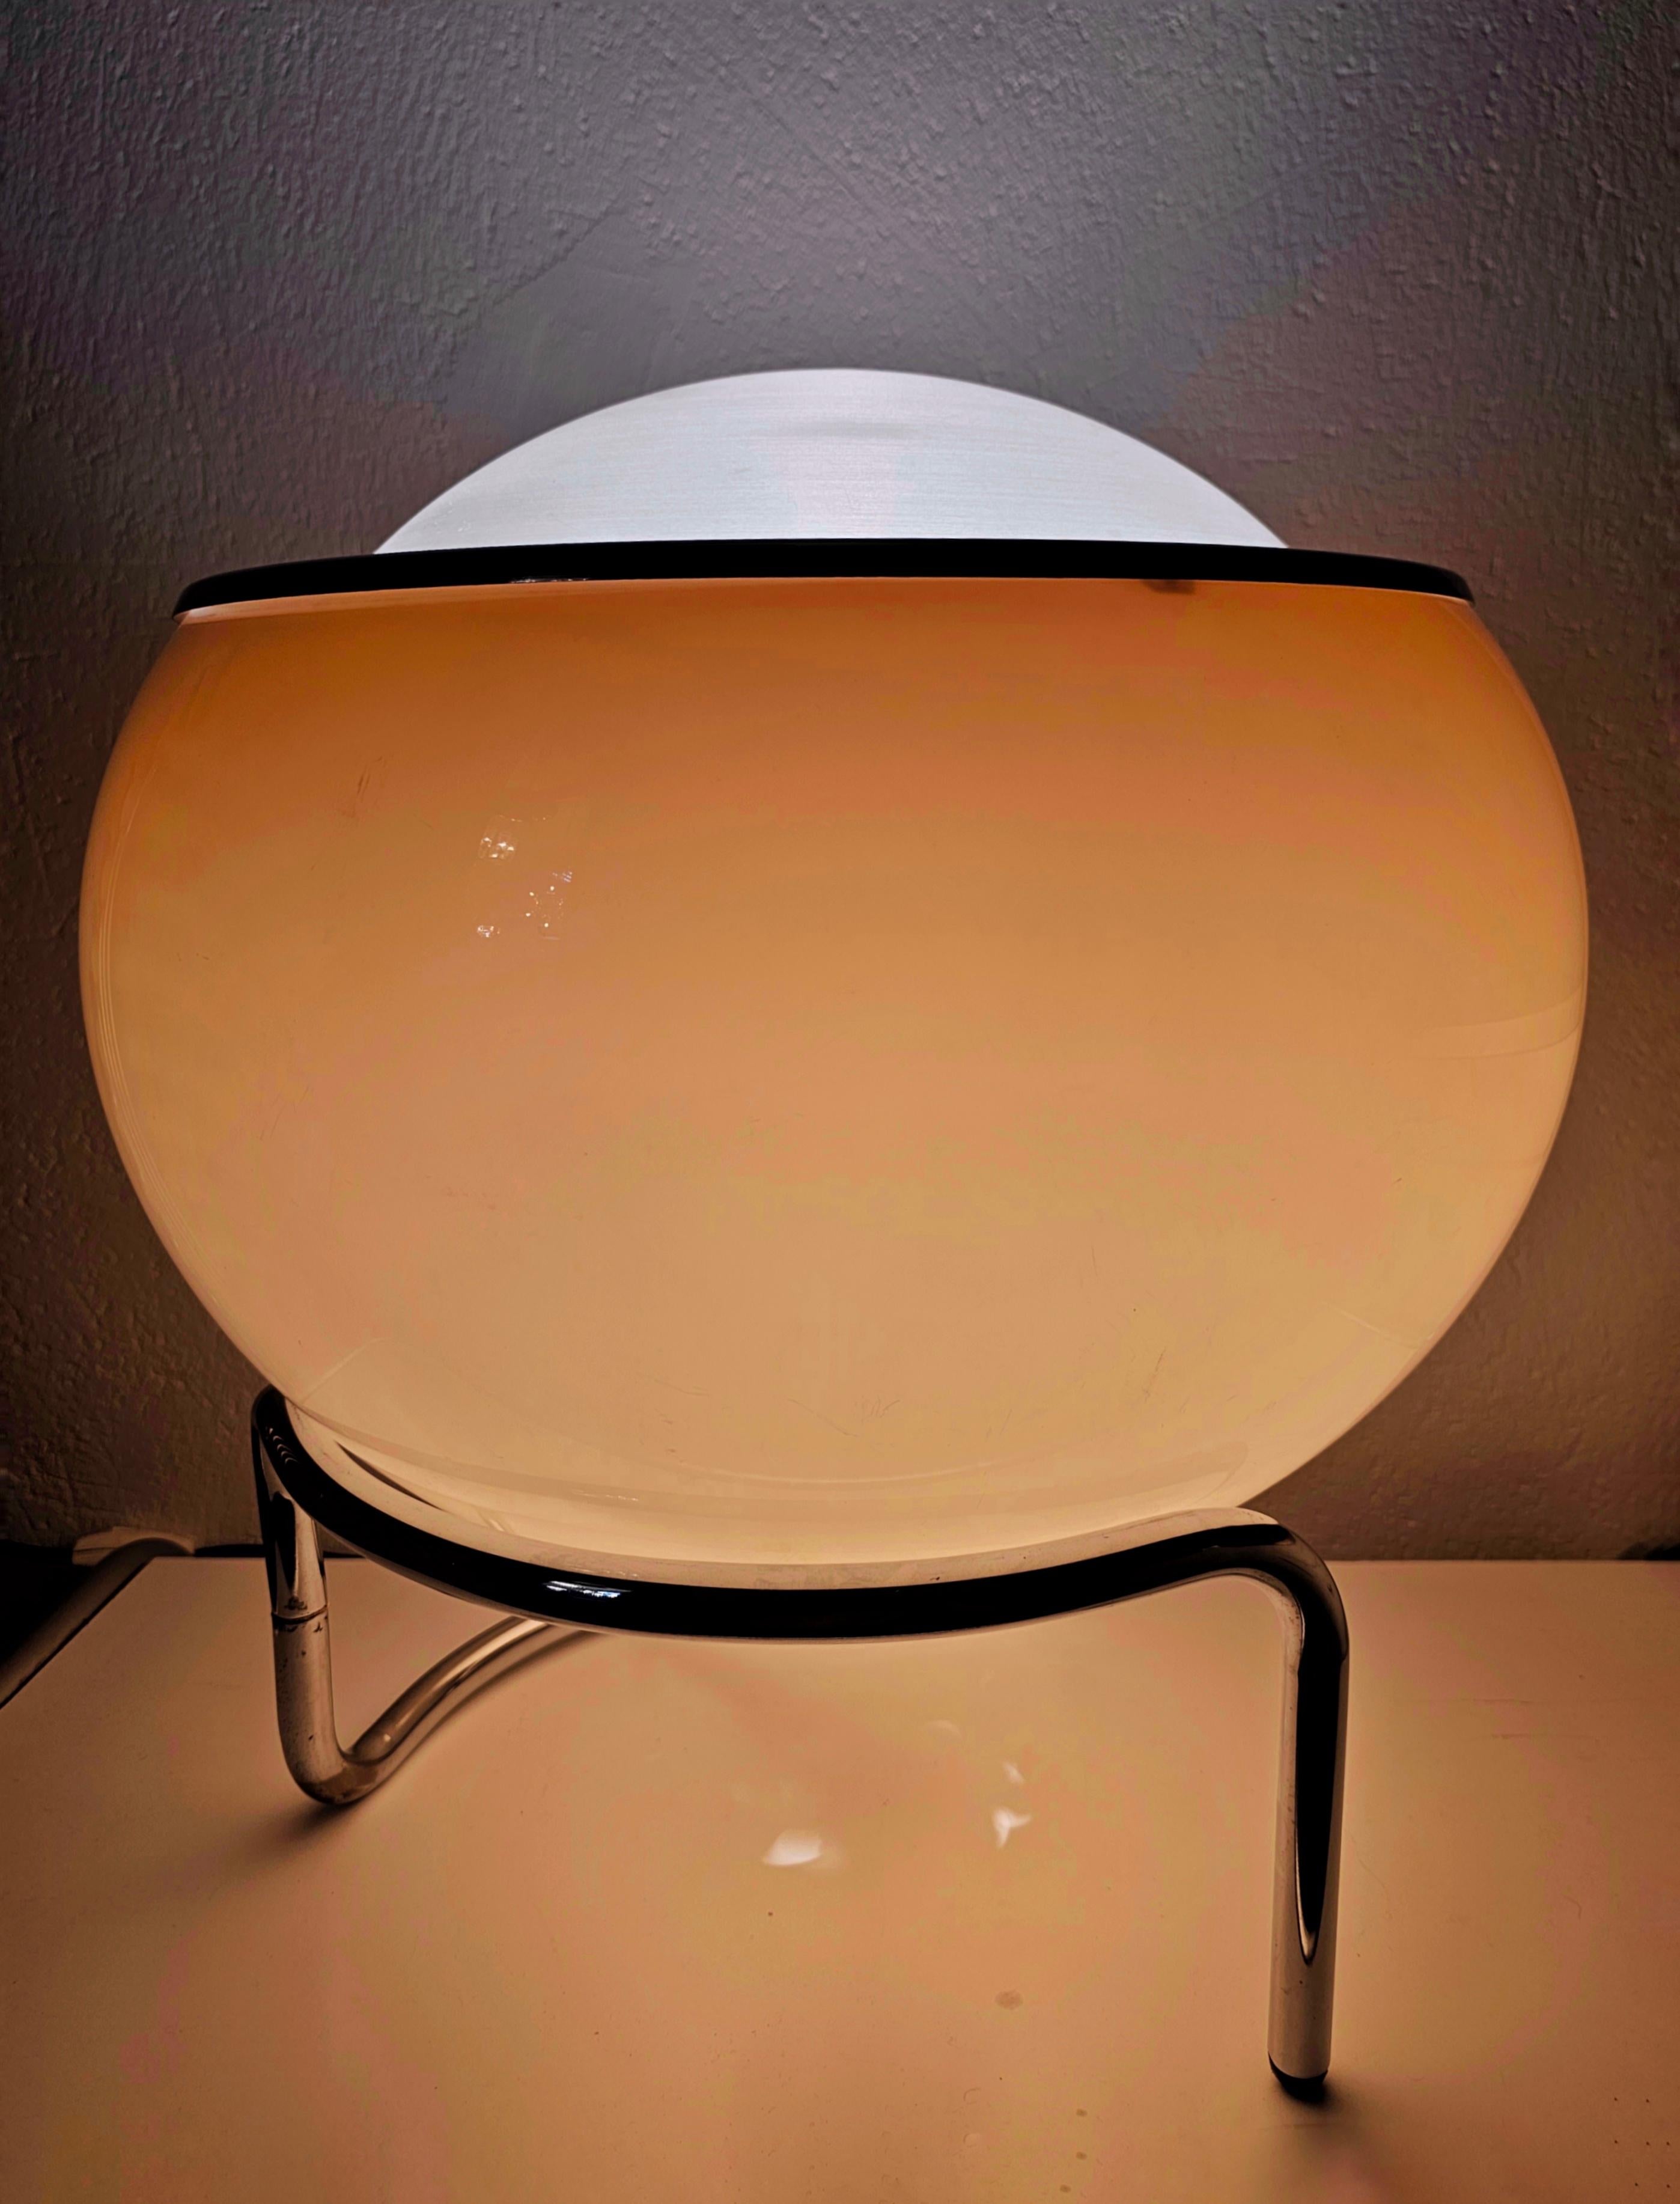 This listing features an astonishing and extremely hard to come by accent lamp by Harvey Guzzini, Model Clam. it was designed by Studio 6G and manufactured by Meblo. it features an infinity chrome stand which holds the Buf Grande shade done in